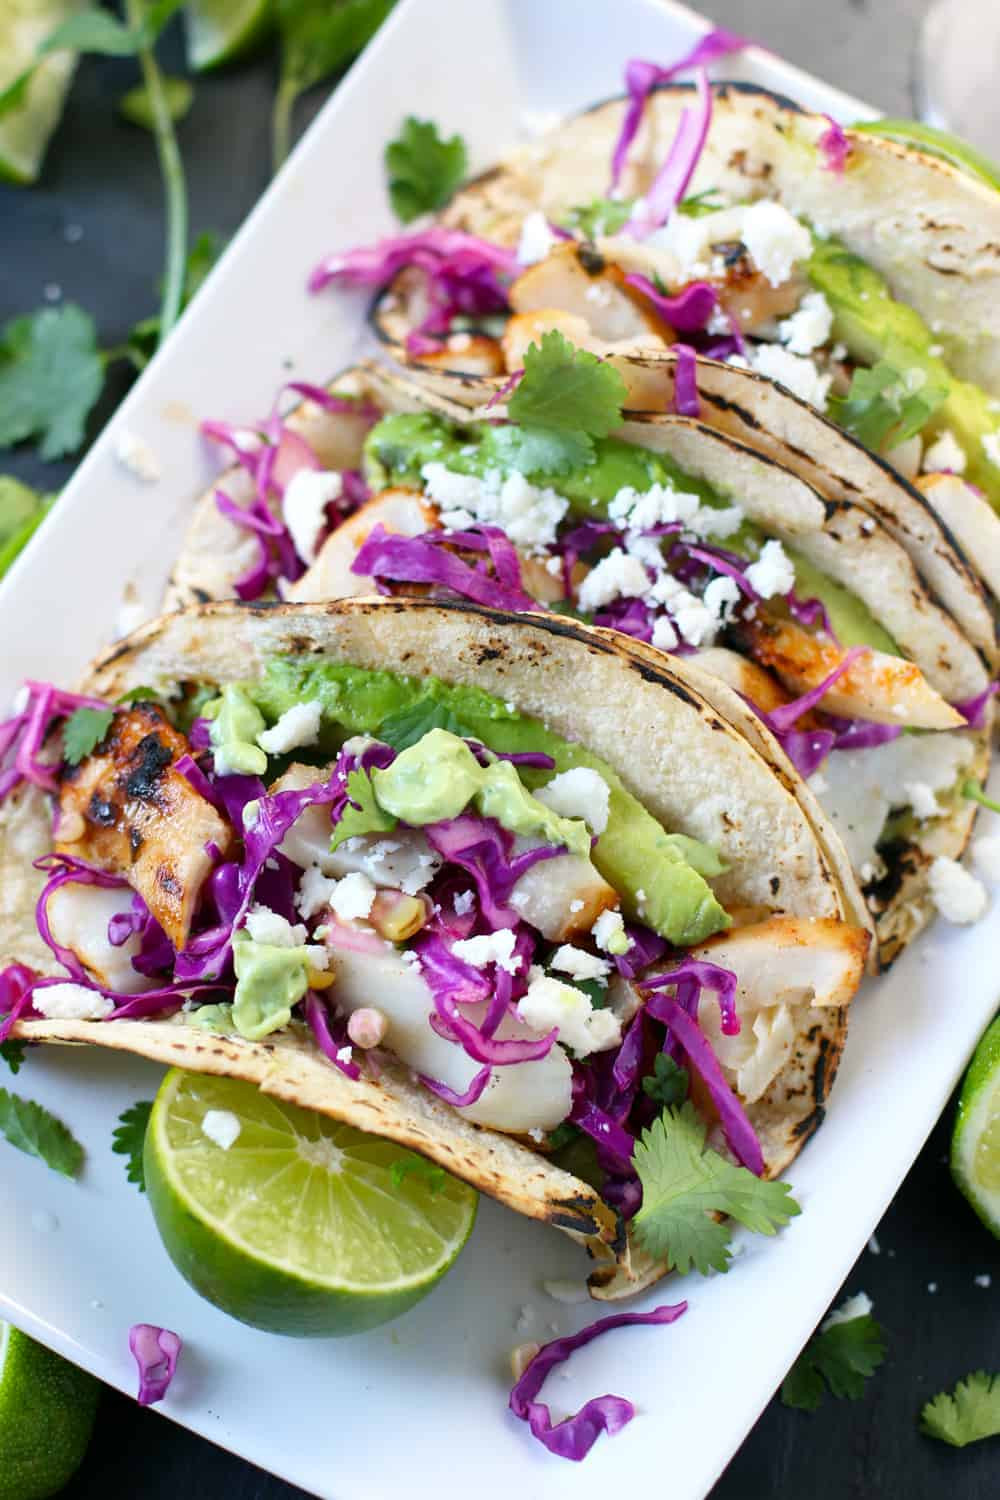 Recipes For Fish Taco Sauce
 Easy and Healthy Grilled Fish Tacos and Wine Pairing